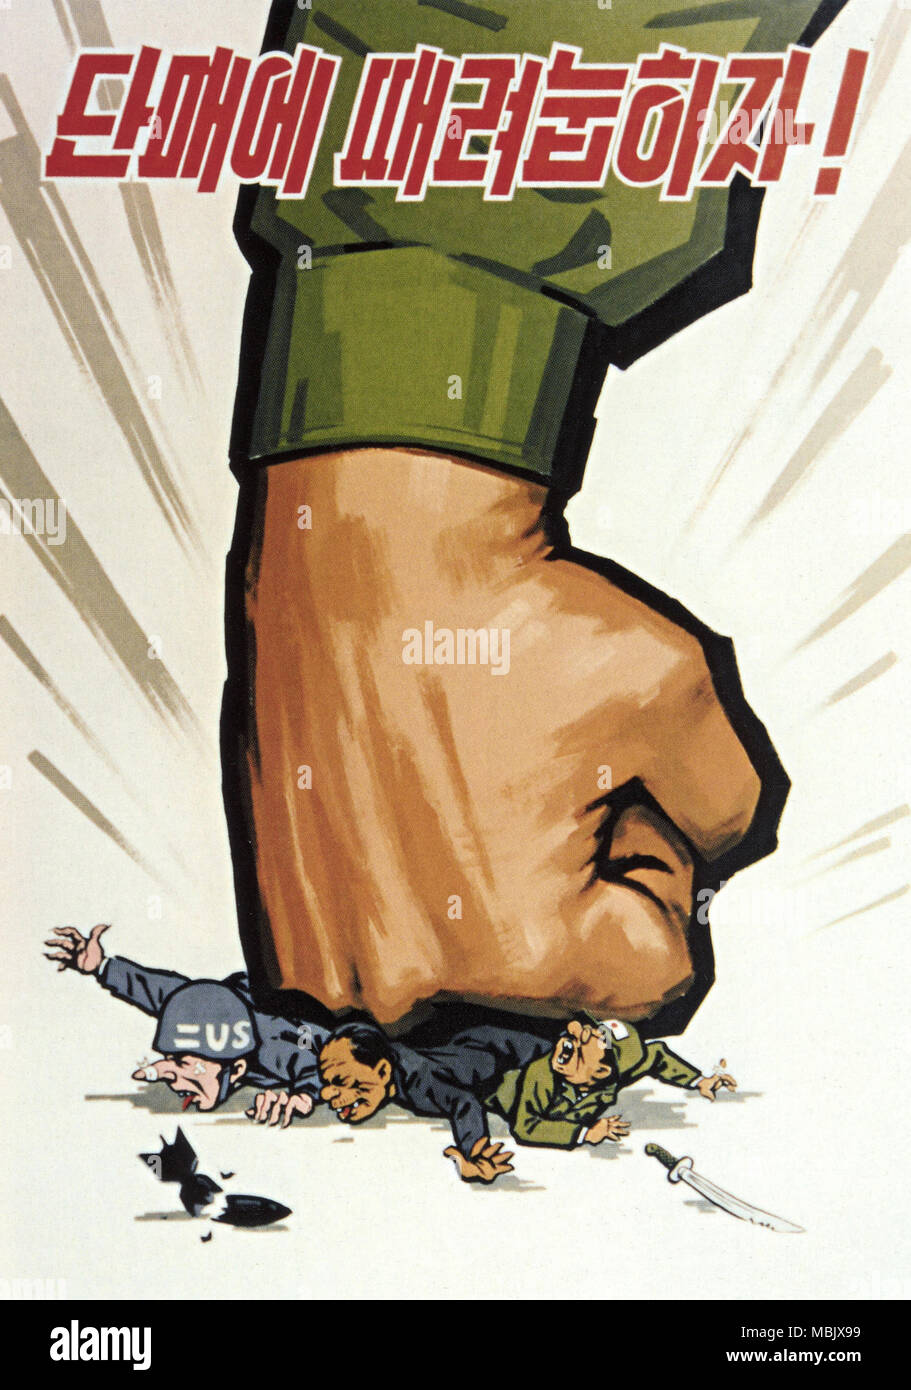 Smash US imperialism in a single blow! Stock Photo